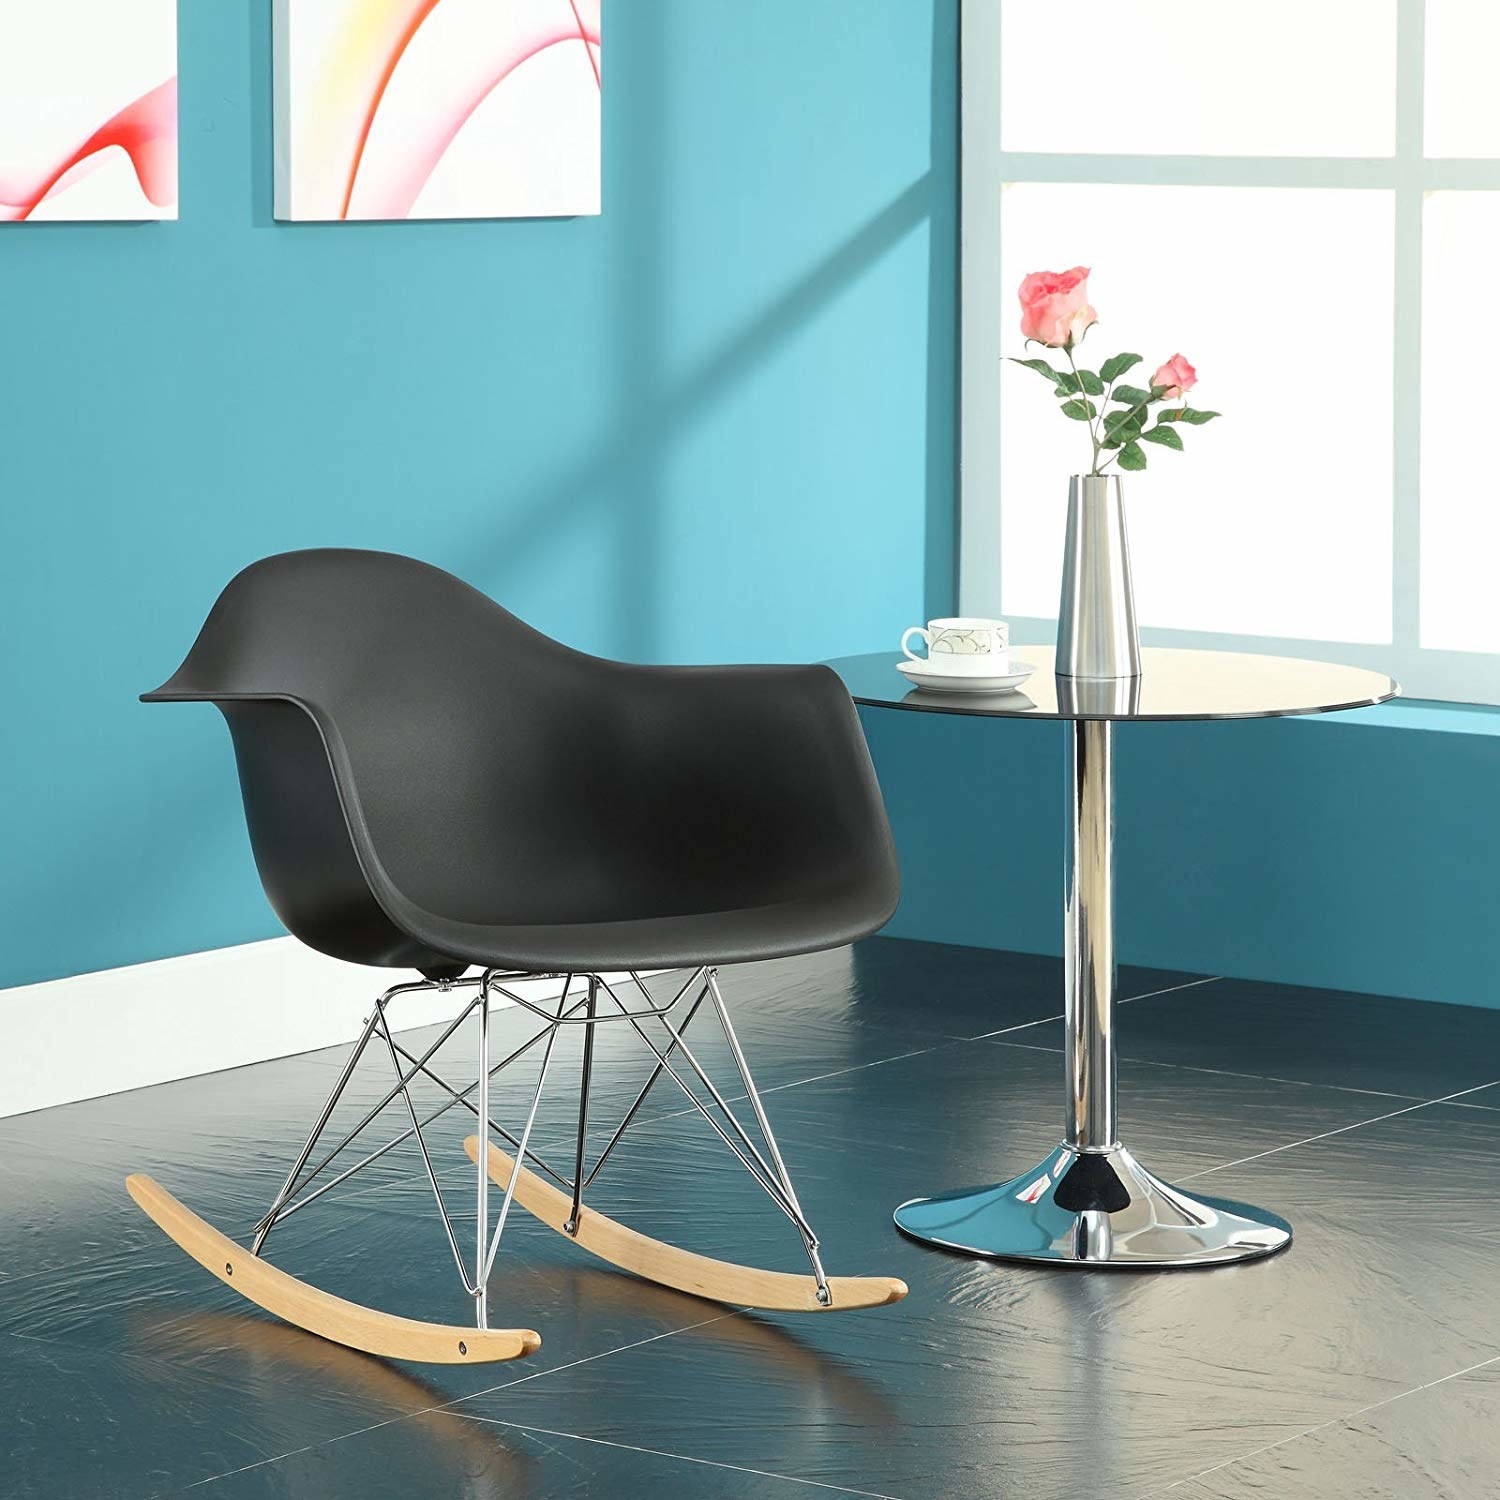 A wide black arm chair with rocker legs